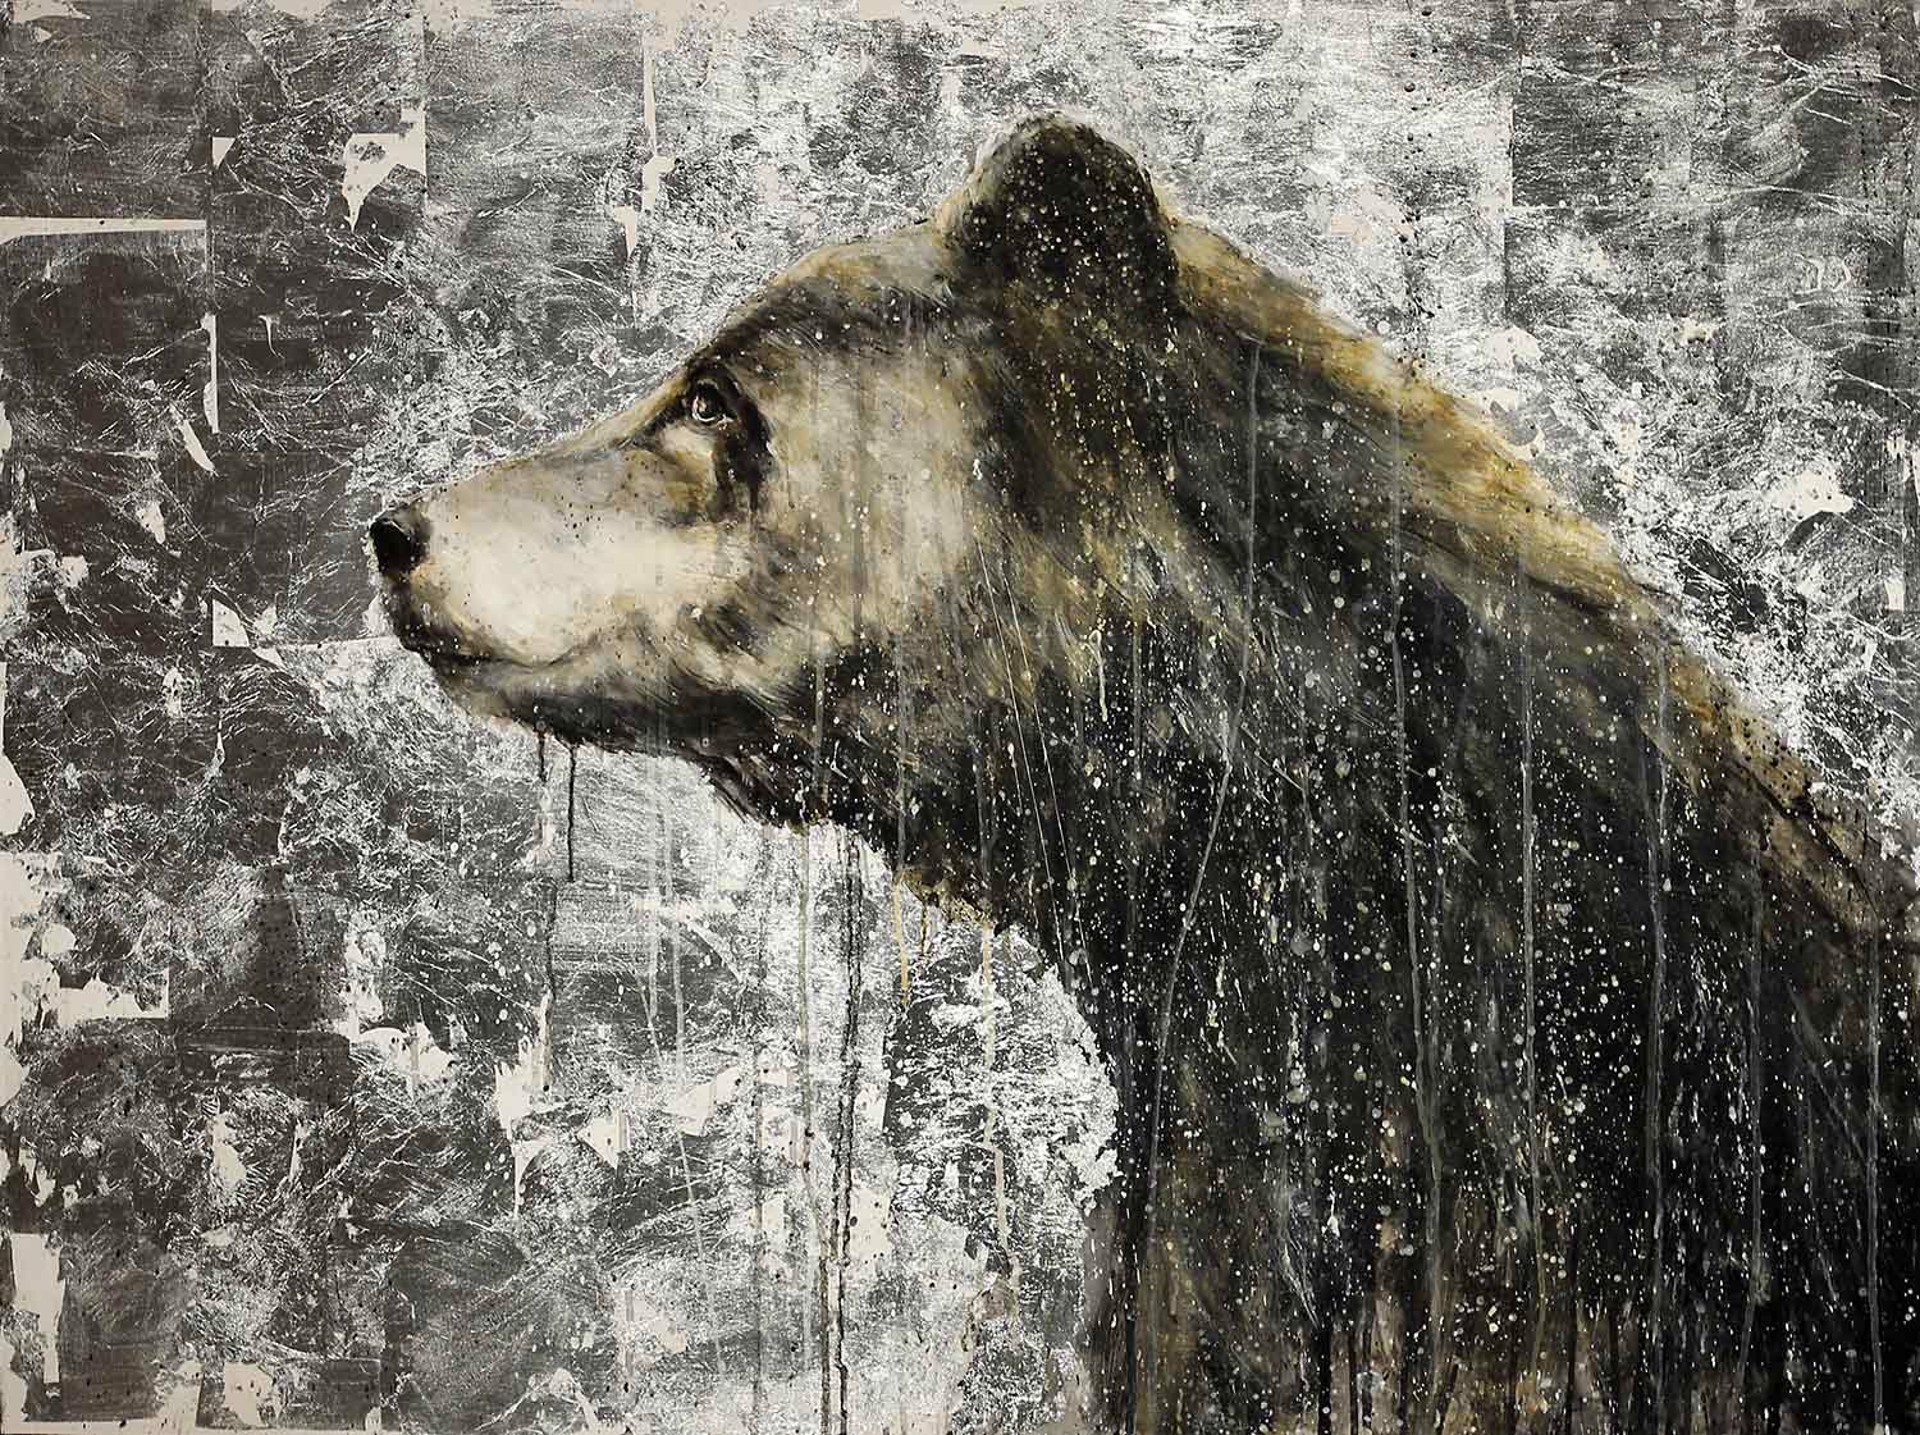 An Original Contemporary Fine Art Painting Of A Side Profile Of A Bear With A Silver And Black Abstract Background By Matt Flint Using Mixed Media On Panel